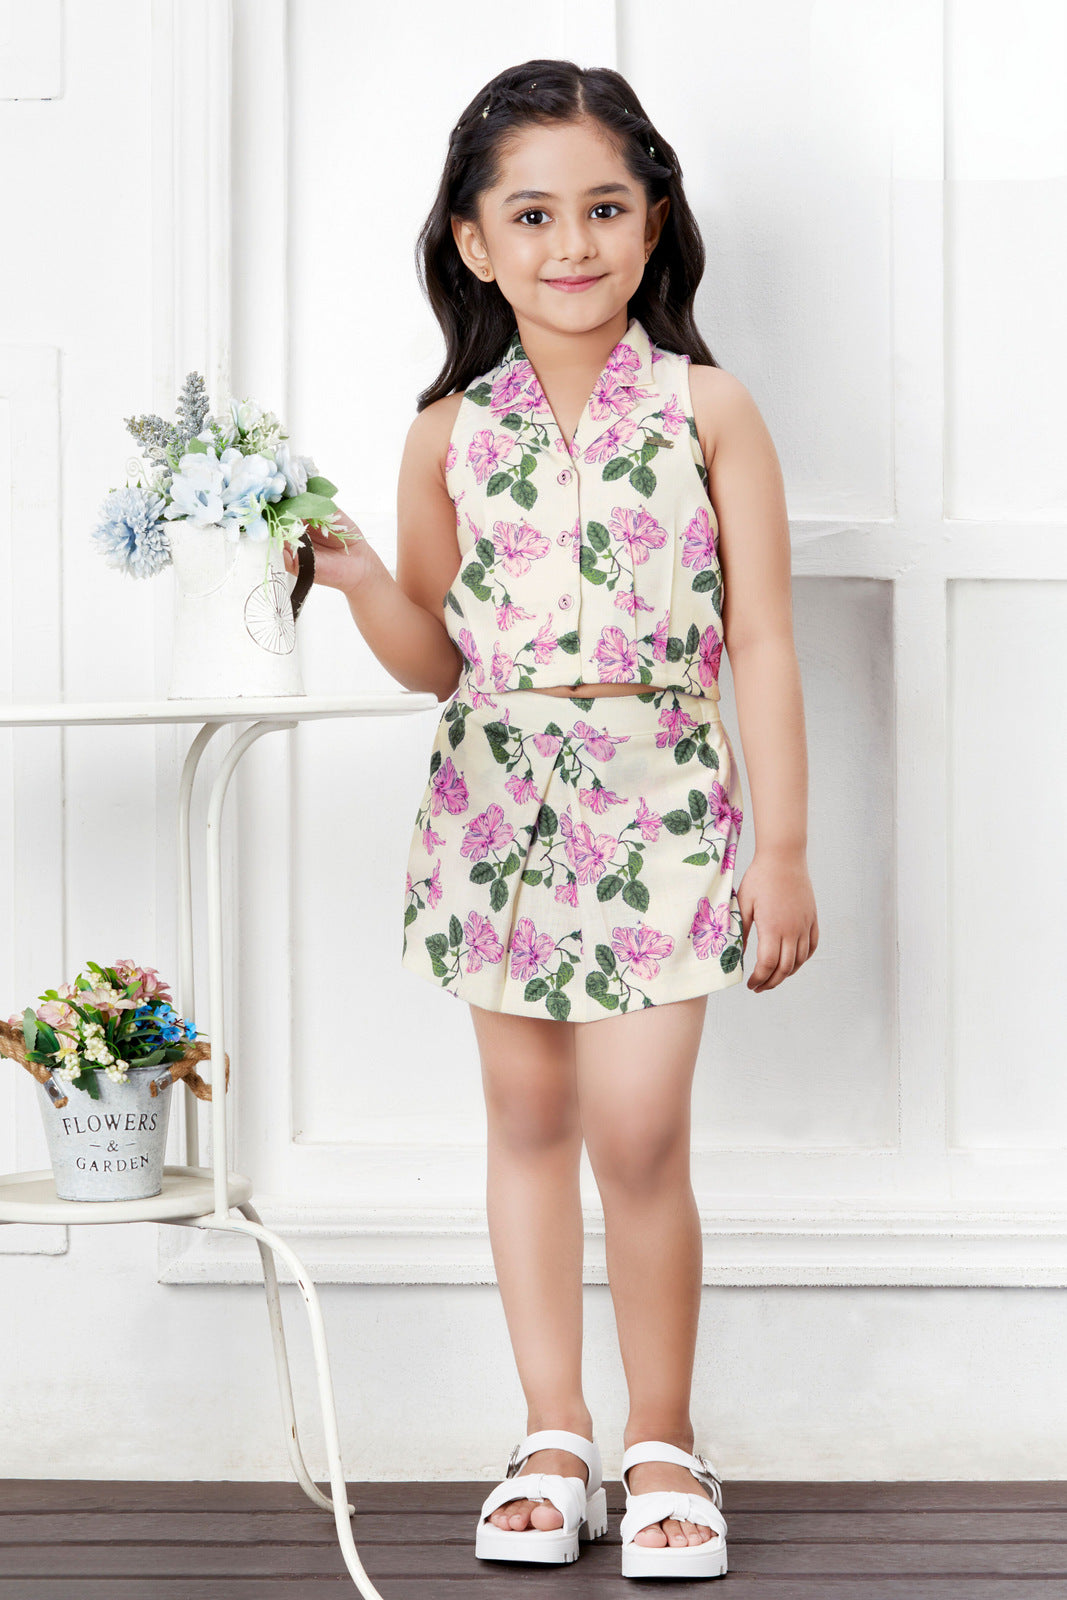 Cream with Floral Print Top and Divider Skirt for Girls